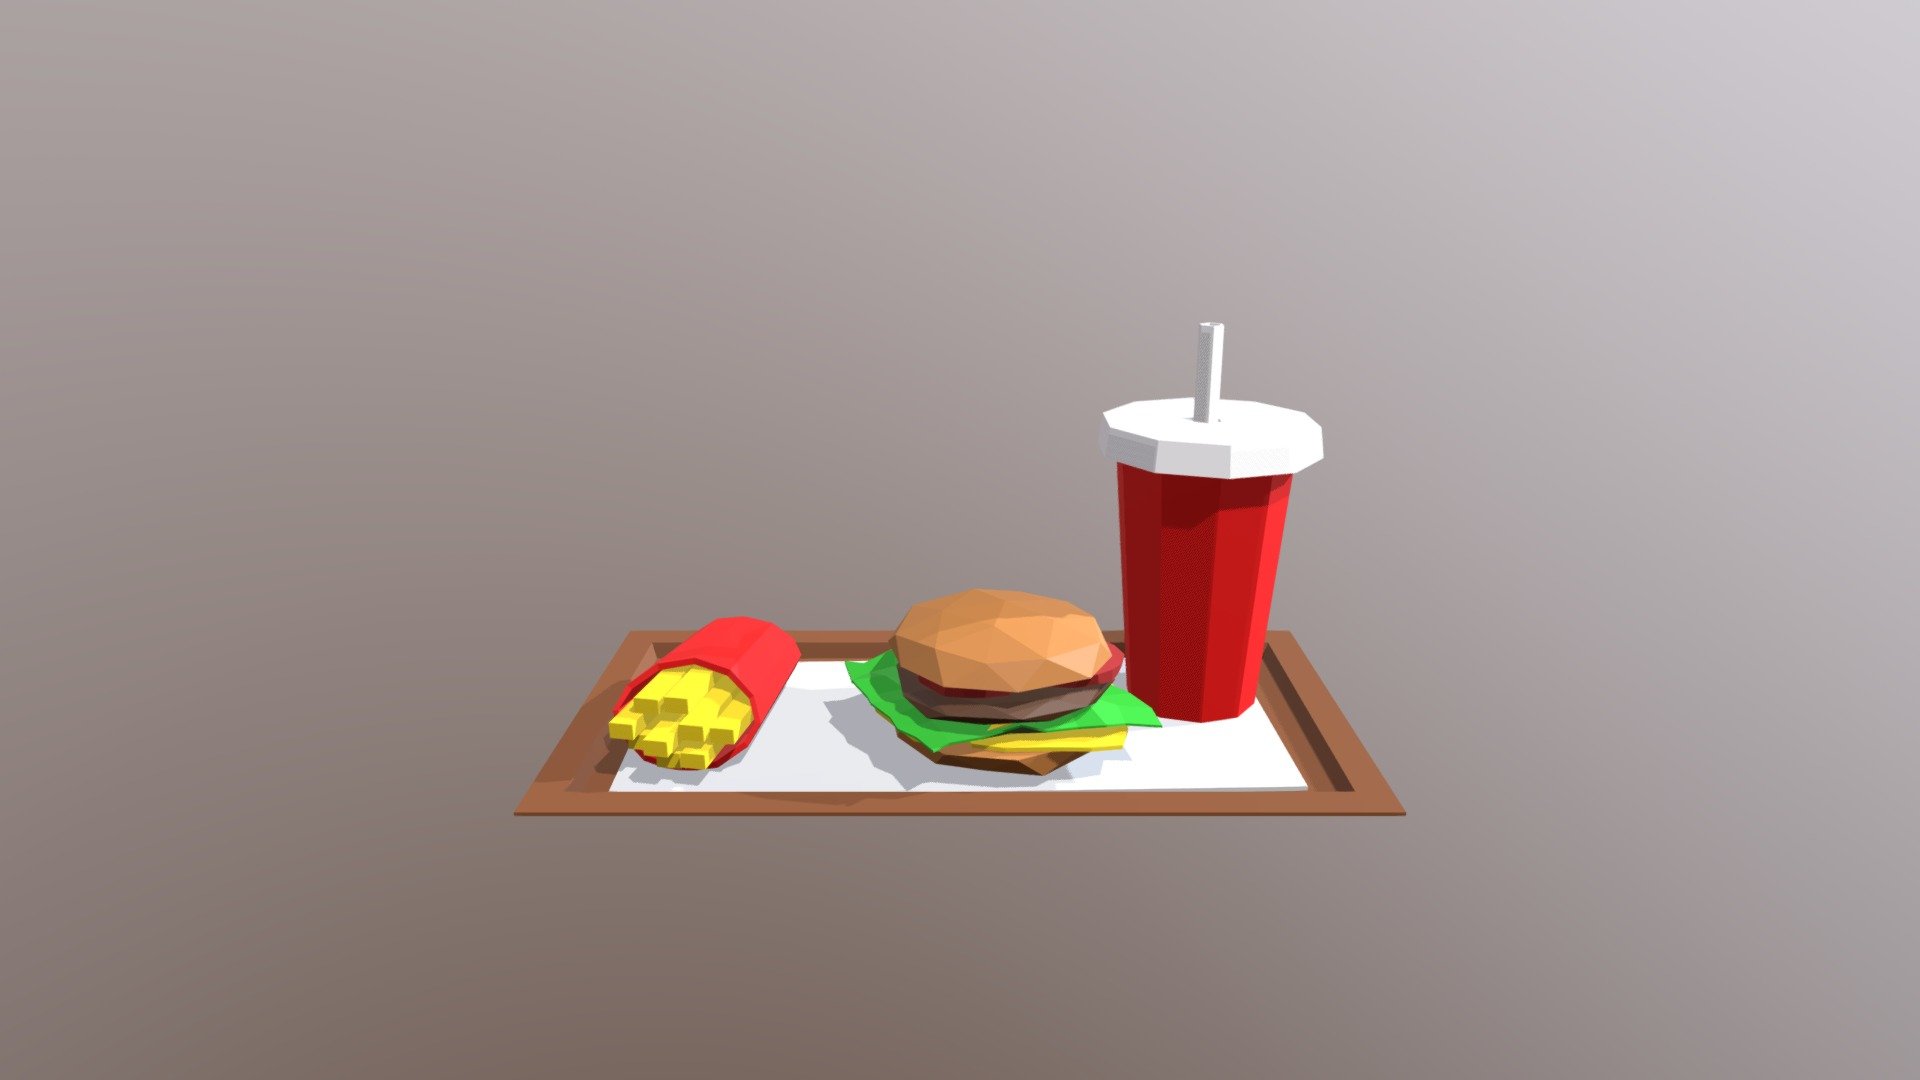 Low poly burger, french fries and soft drink on a tray. Roughly to scale in metric units 3d model